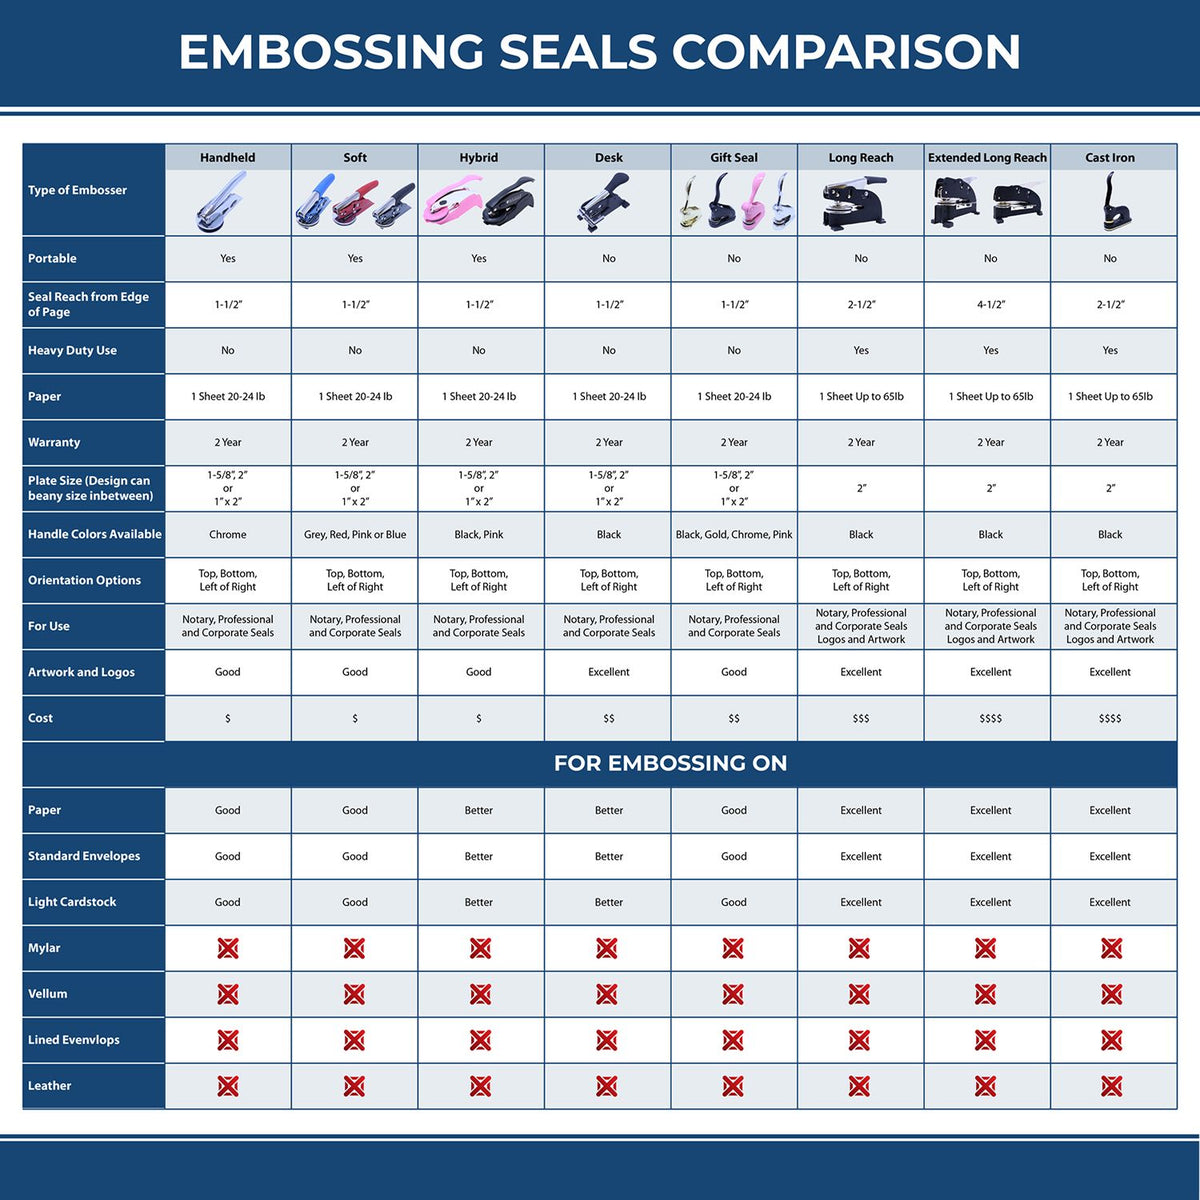 A comparison chart for the different types of mount models available for the Heavy Duty Cast Iron Mississippi Geologist Seal Embosser